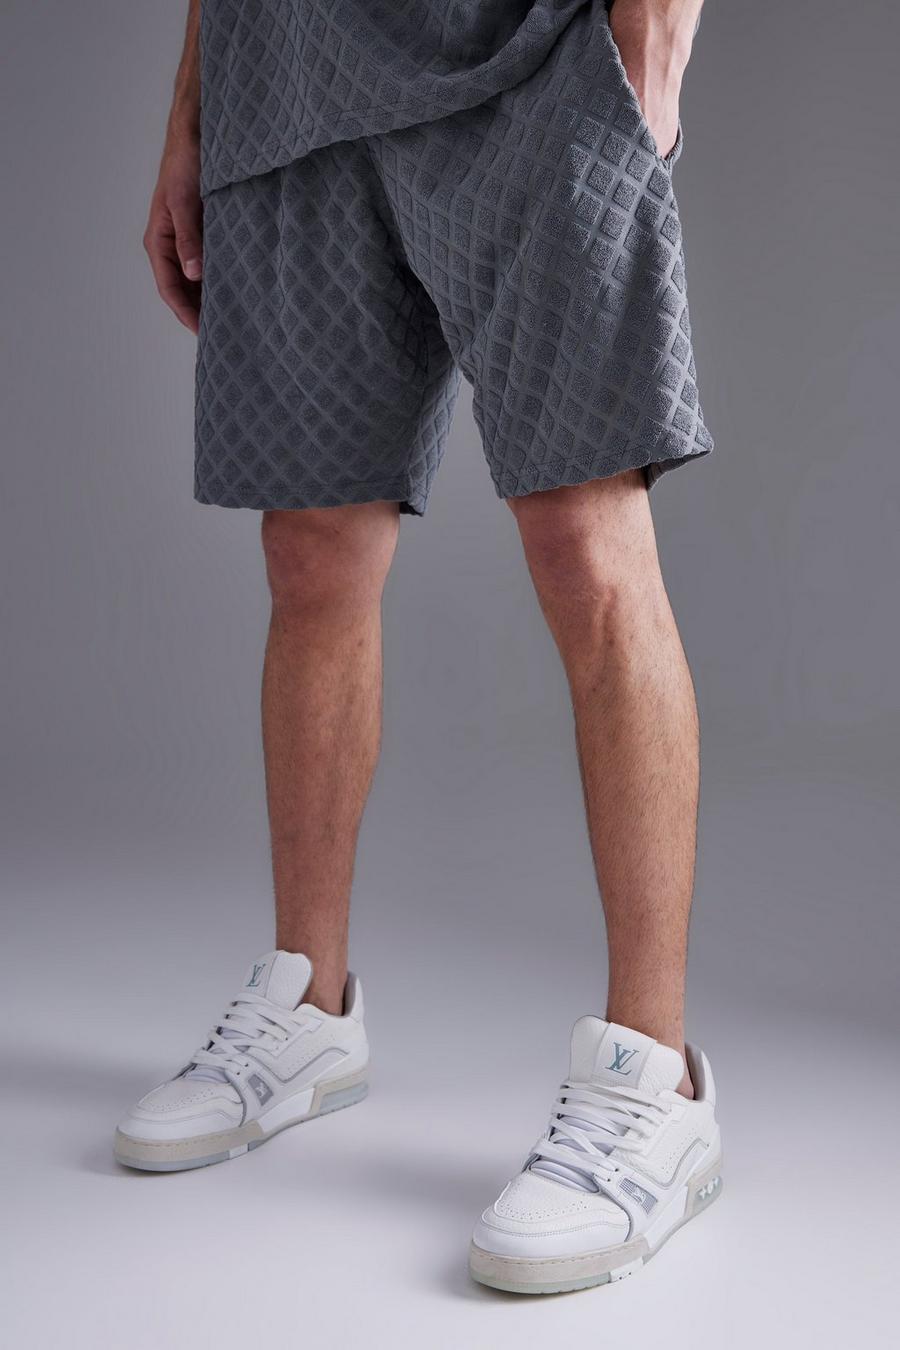 Charcoal grey Relaxed Fit Short Diamond Towelling Short